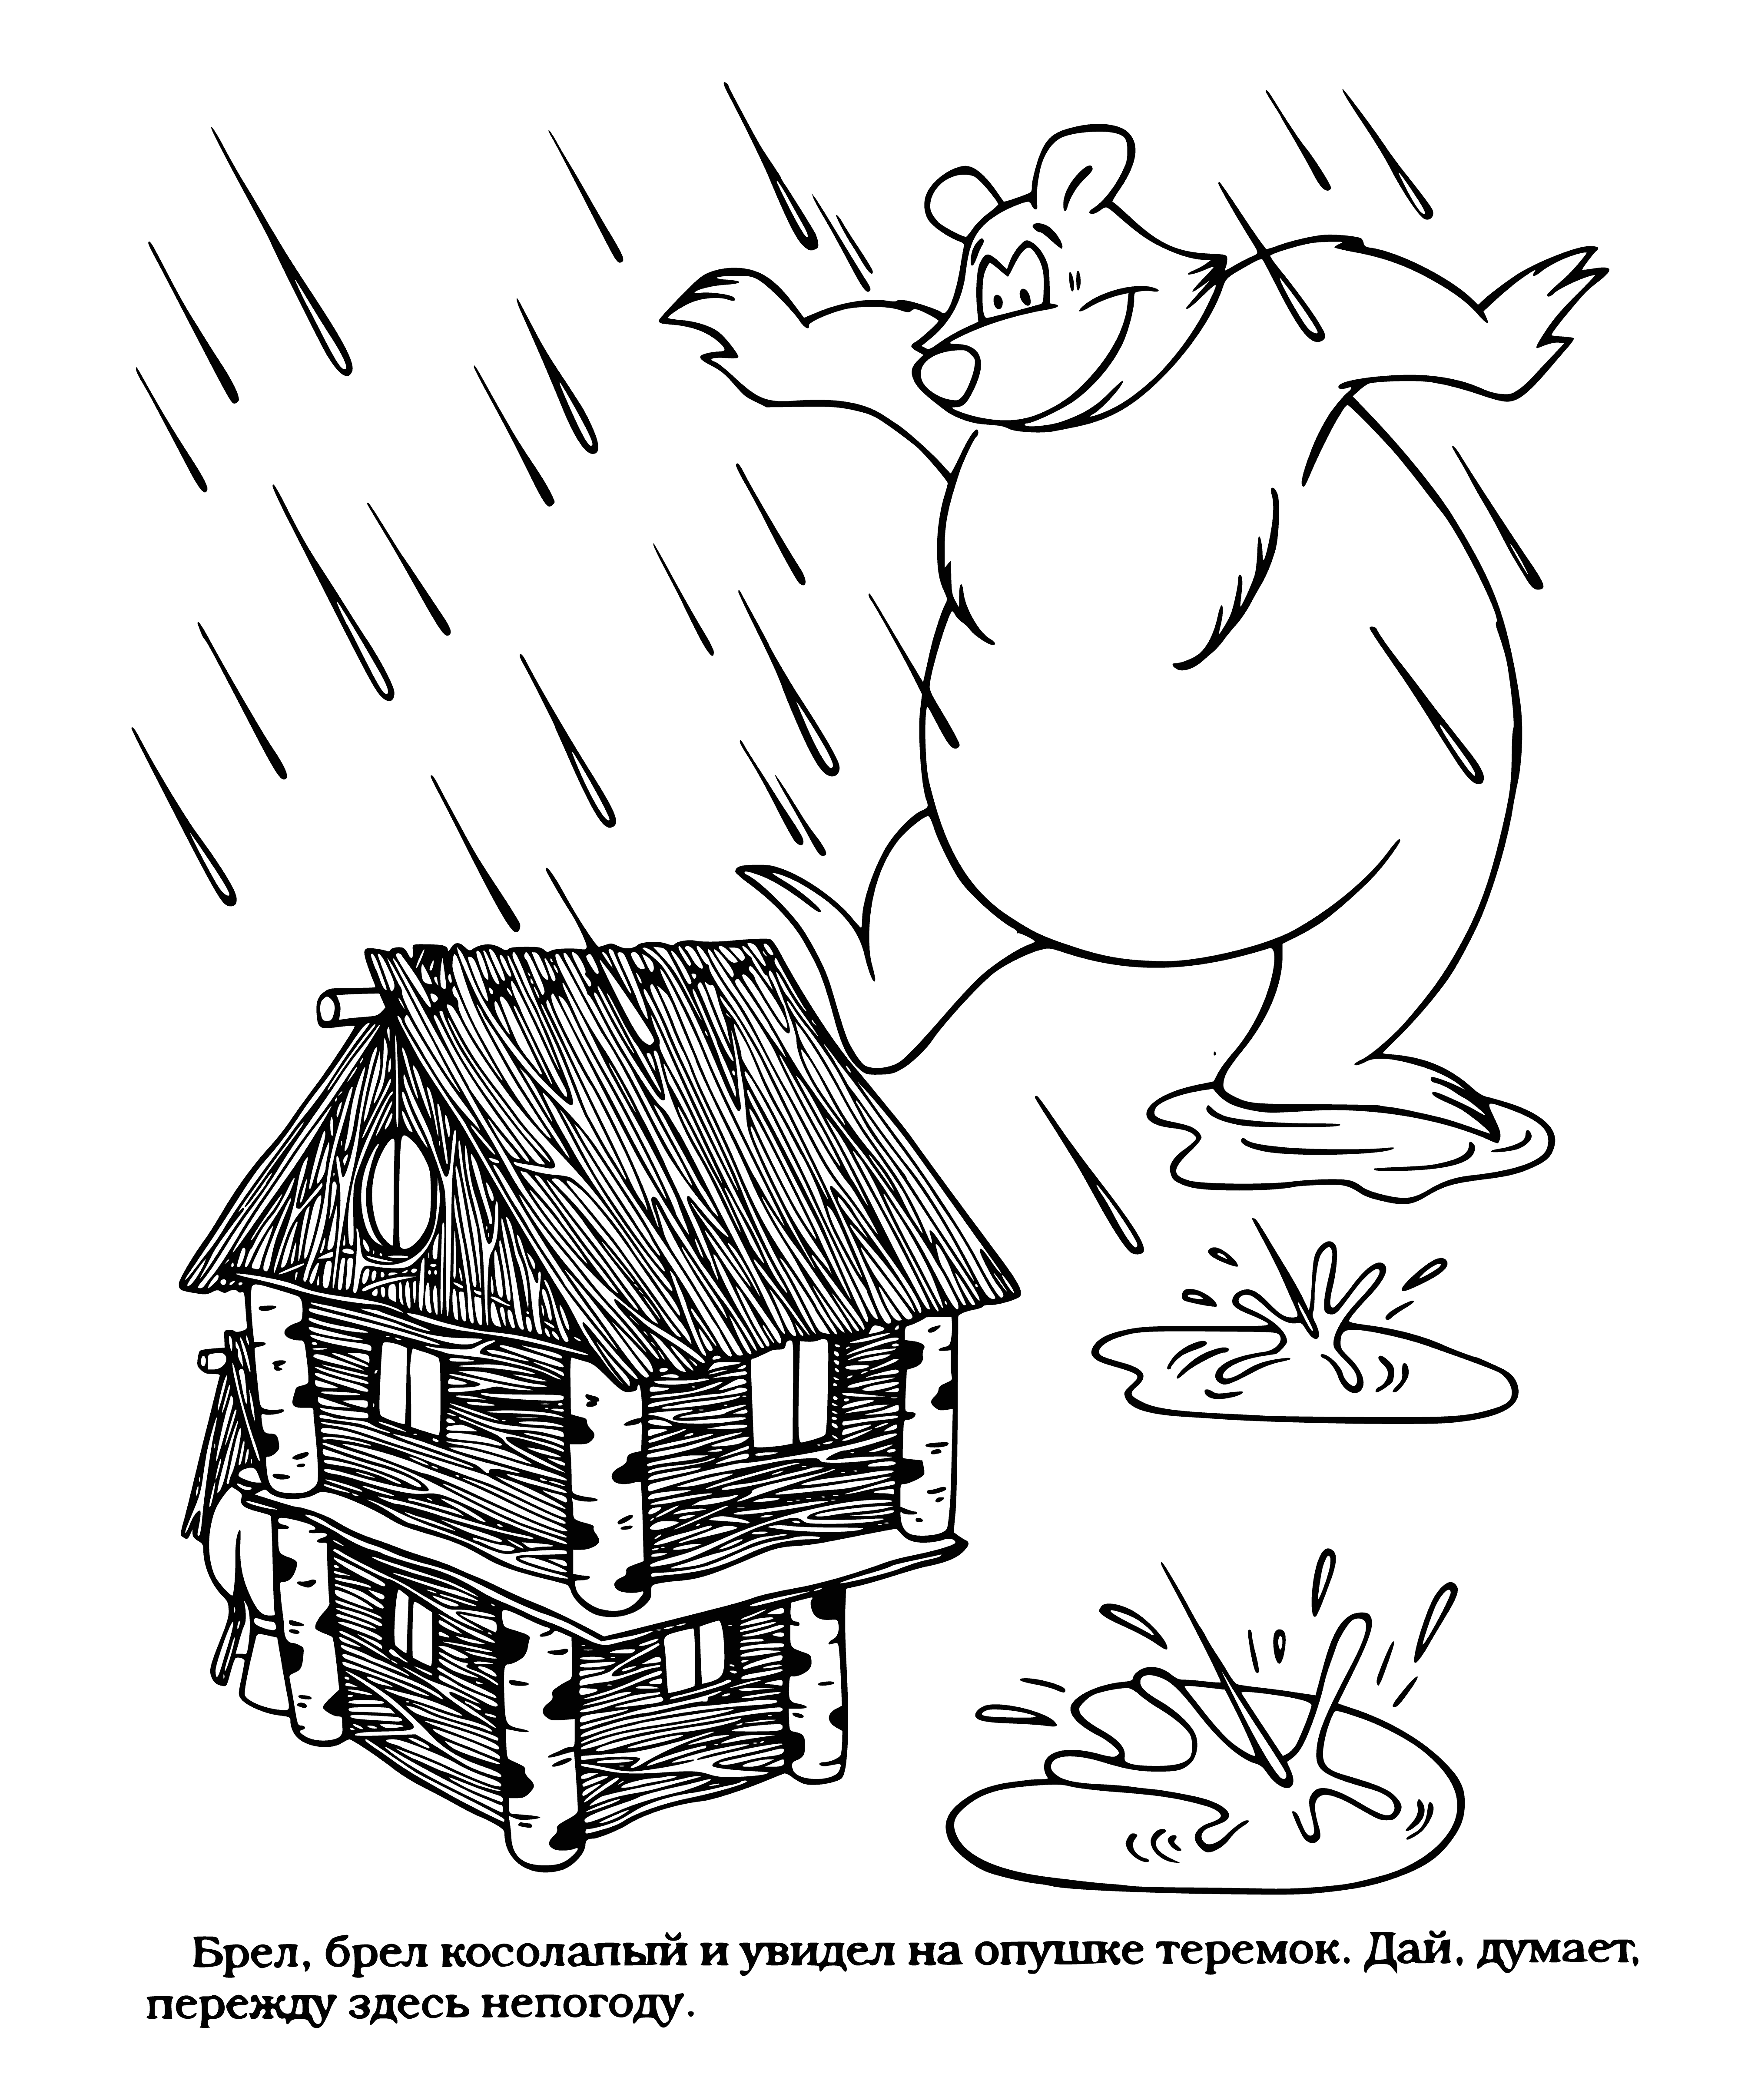 Found Teremok coloring page